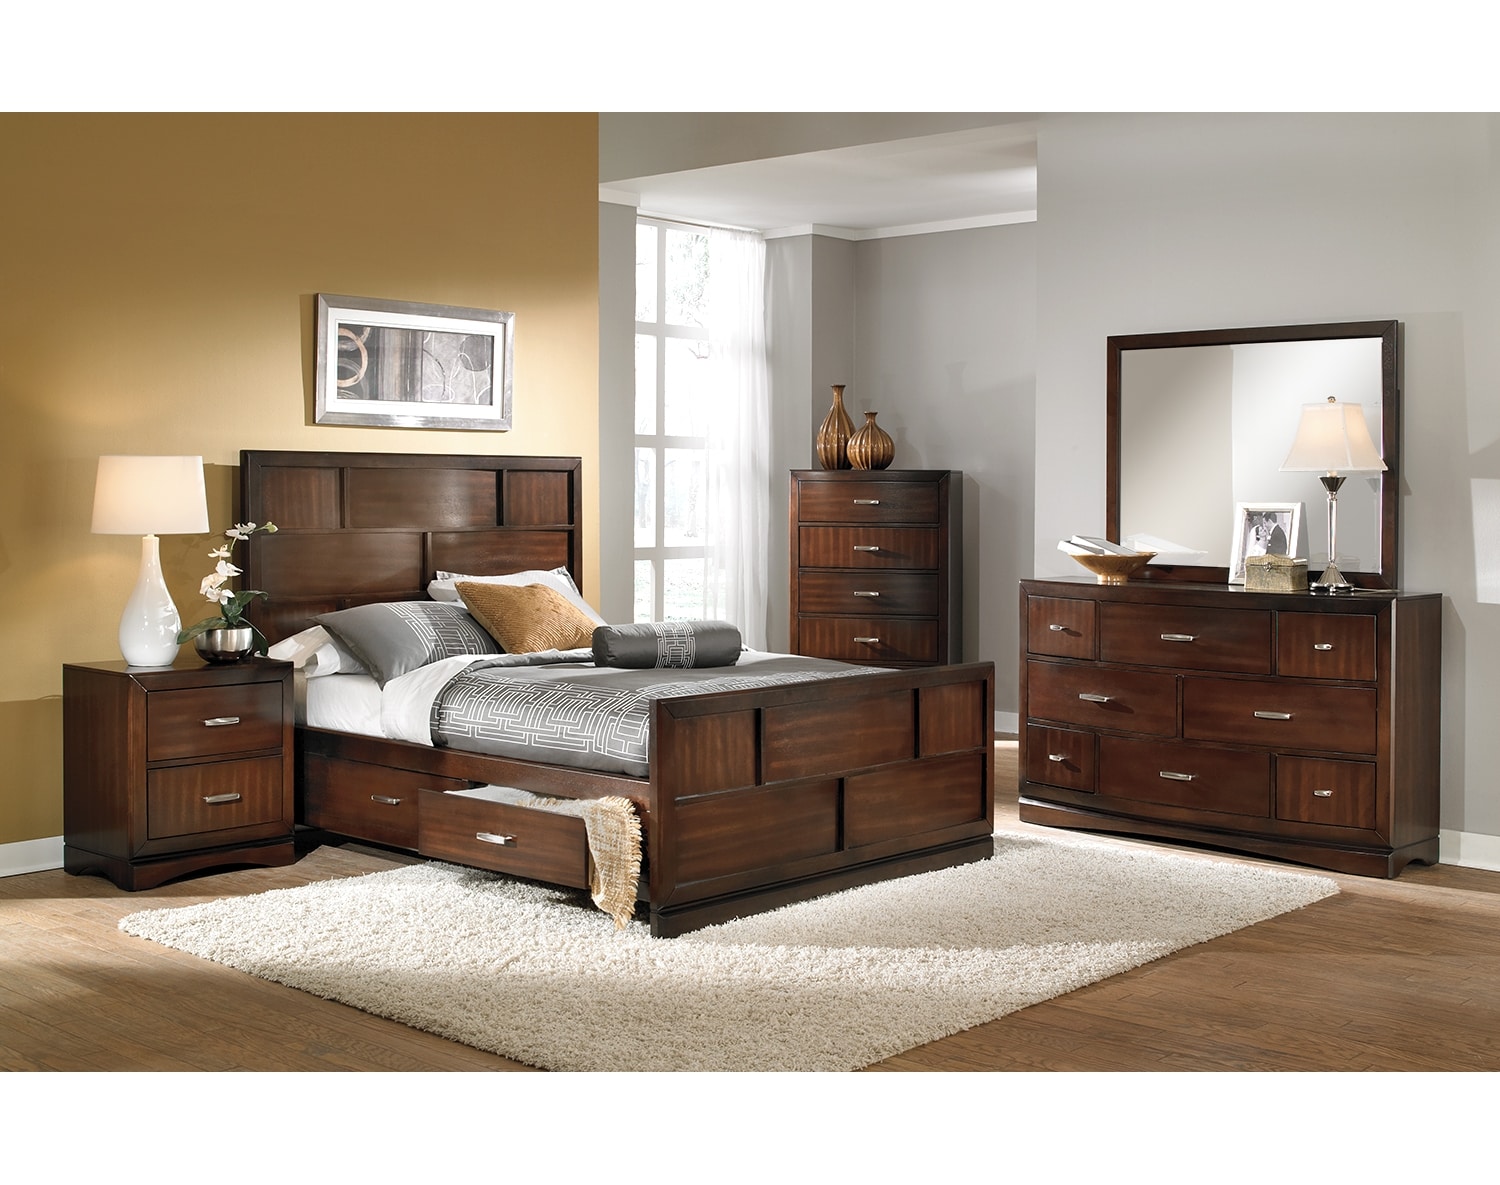 The Toronto Bedroom Collection American Signature Furniture